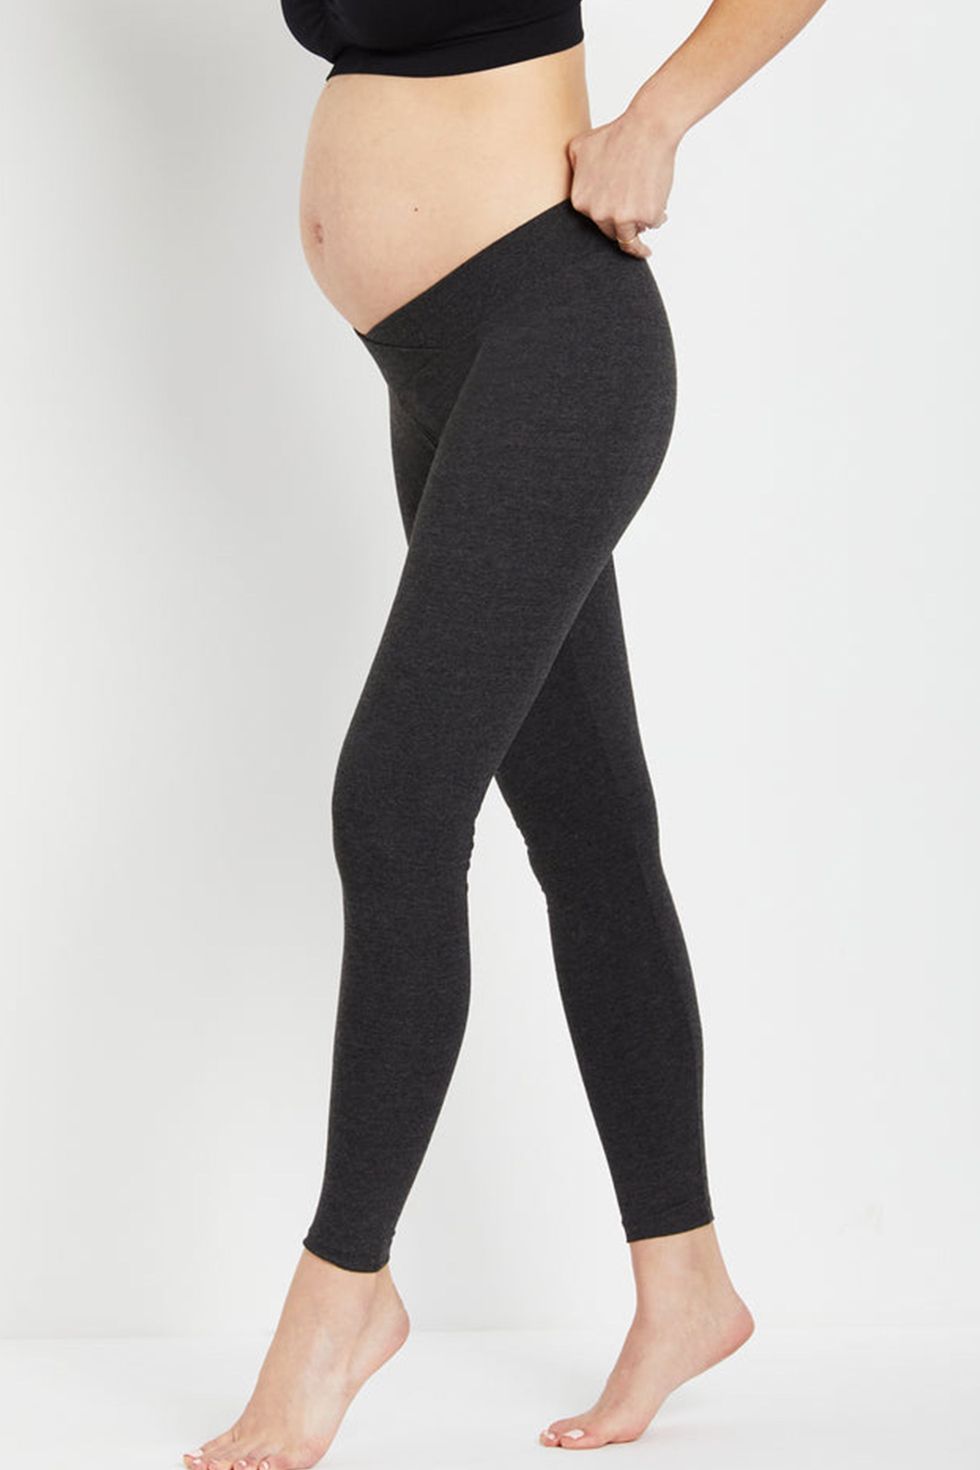 The SKIMS Maternity Collection Just Dropped! Shop Maternity Tights